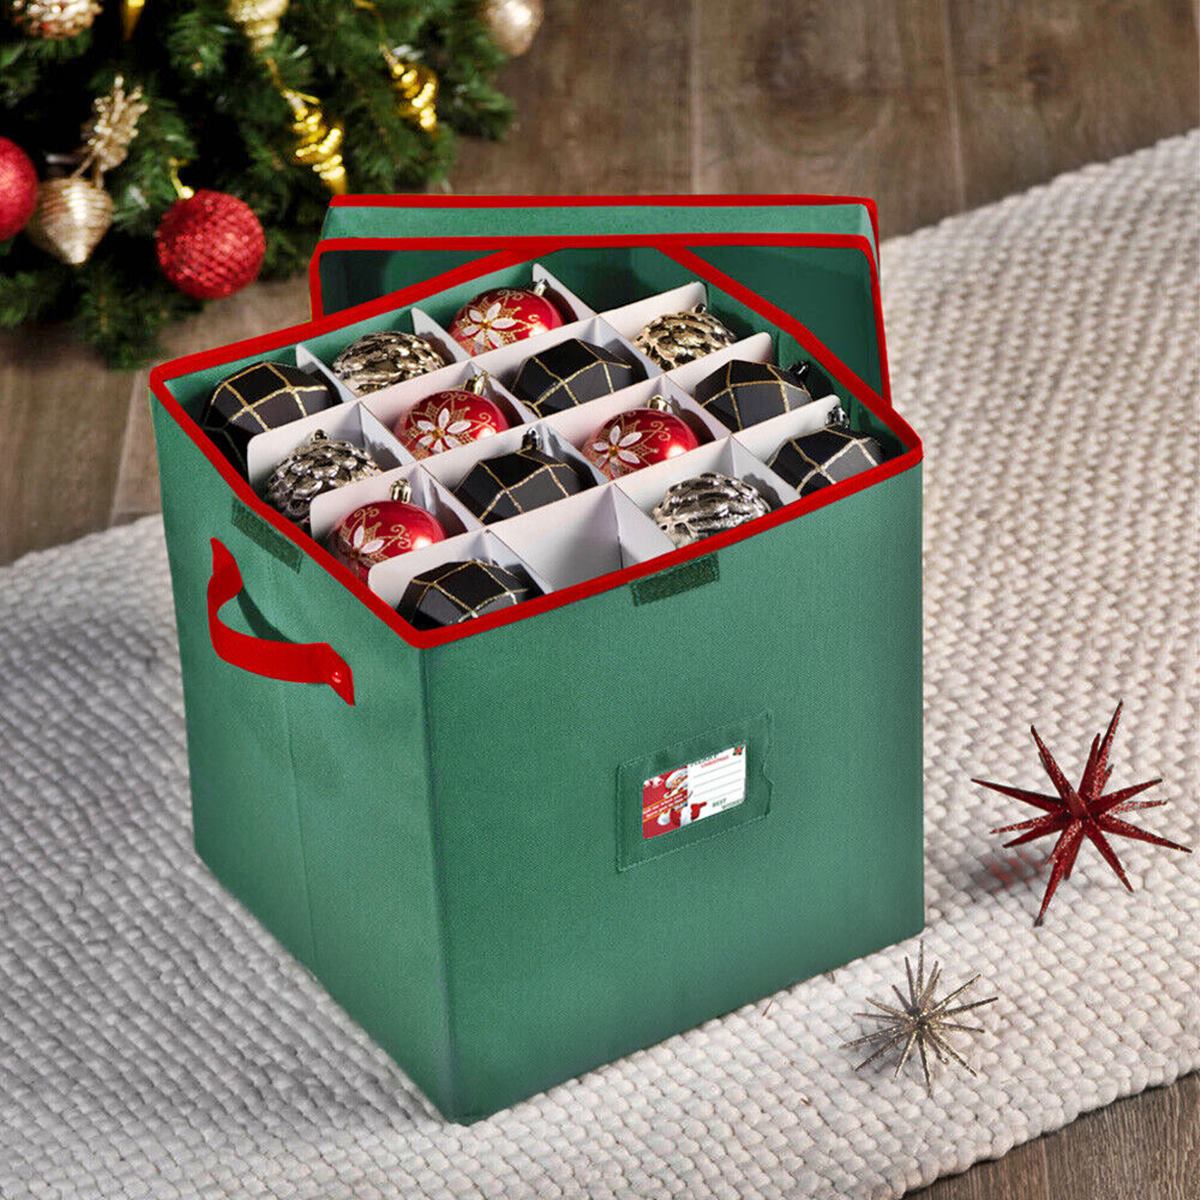 Hearth & Harbor Large Plastic Christmas Ornament Storage Box With